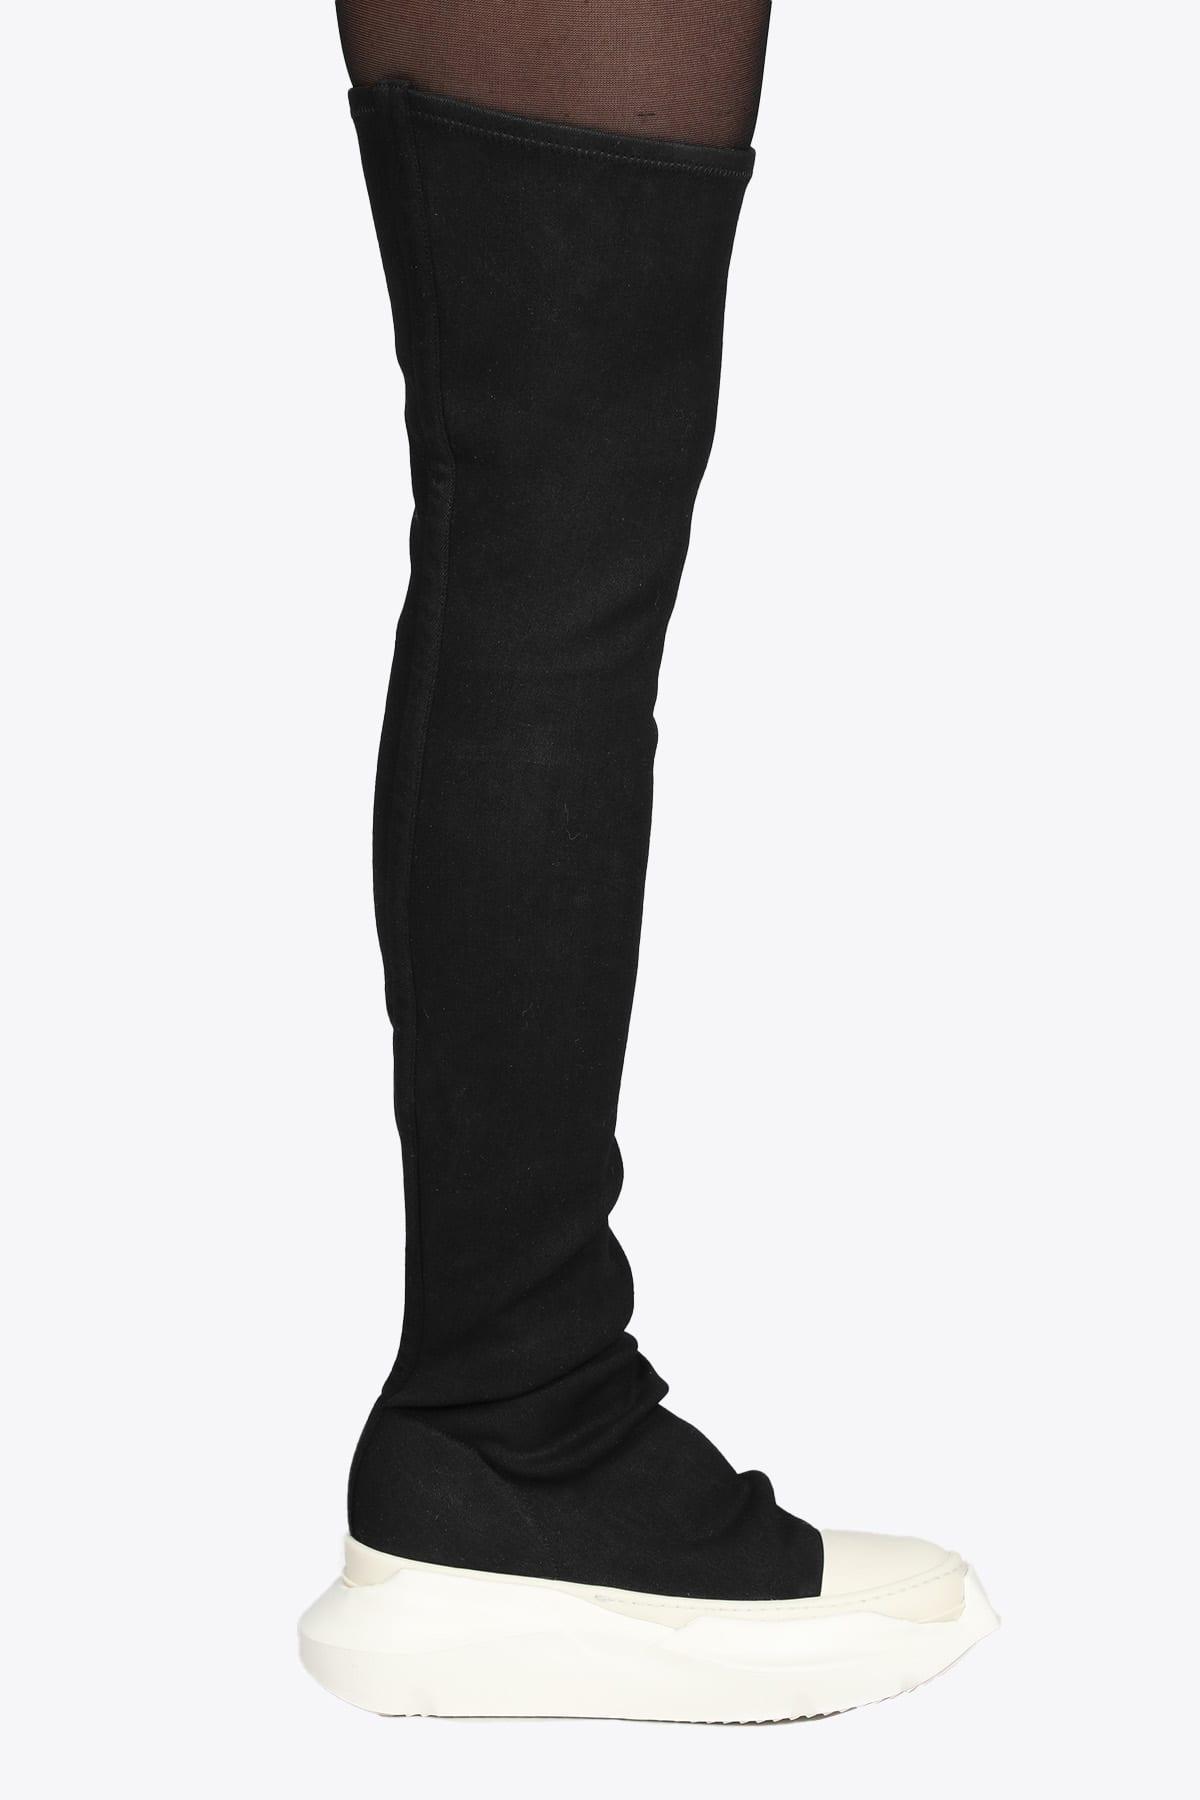 Rick Owens DRKSHDW Stivali Denim Abstract Black Stretch Canvas Abstract  Thigh High Boots | Lyst